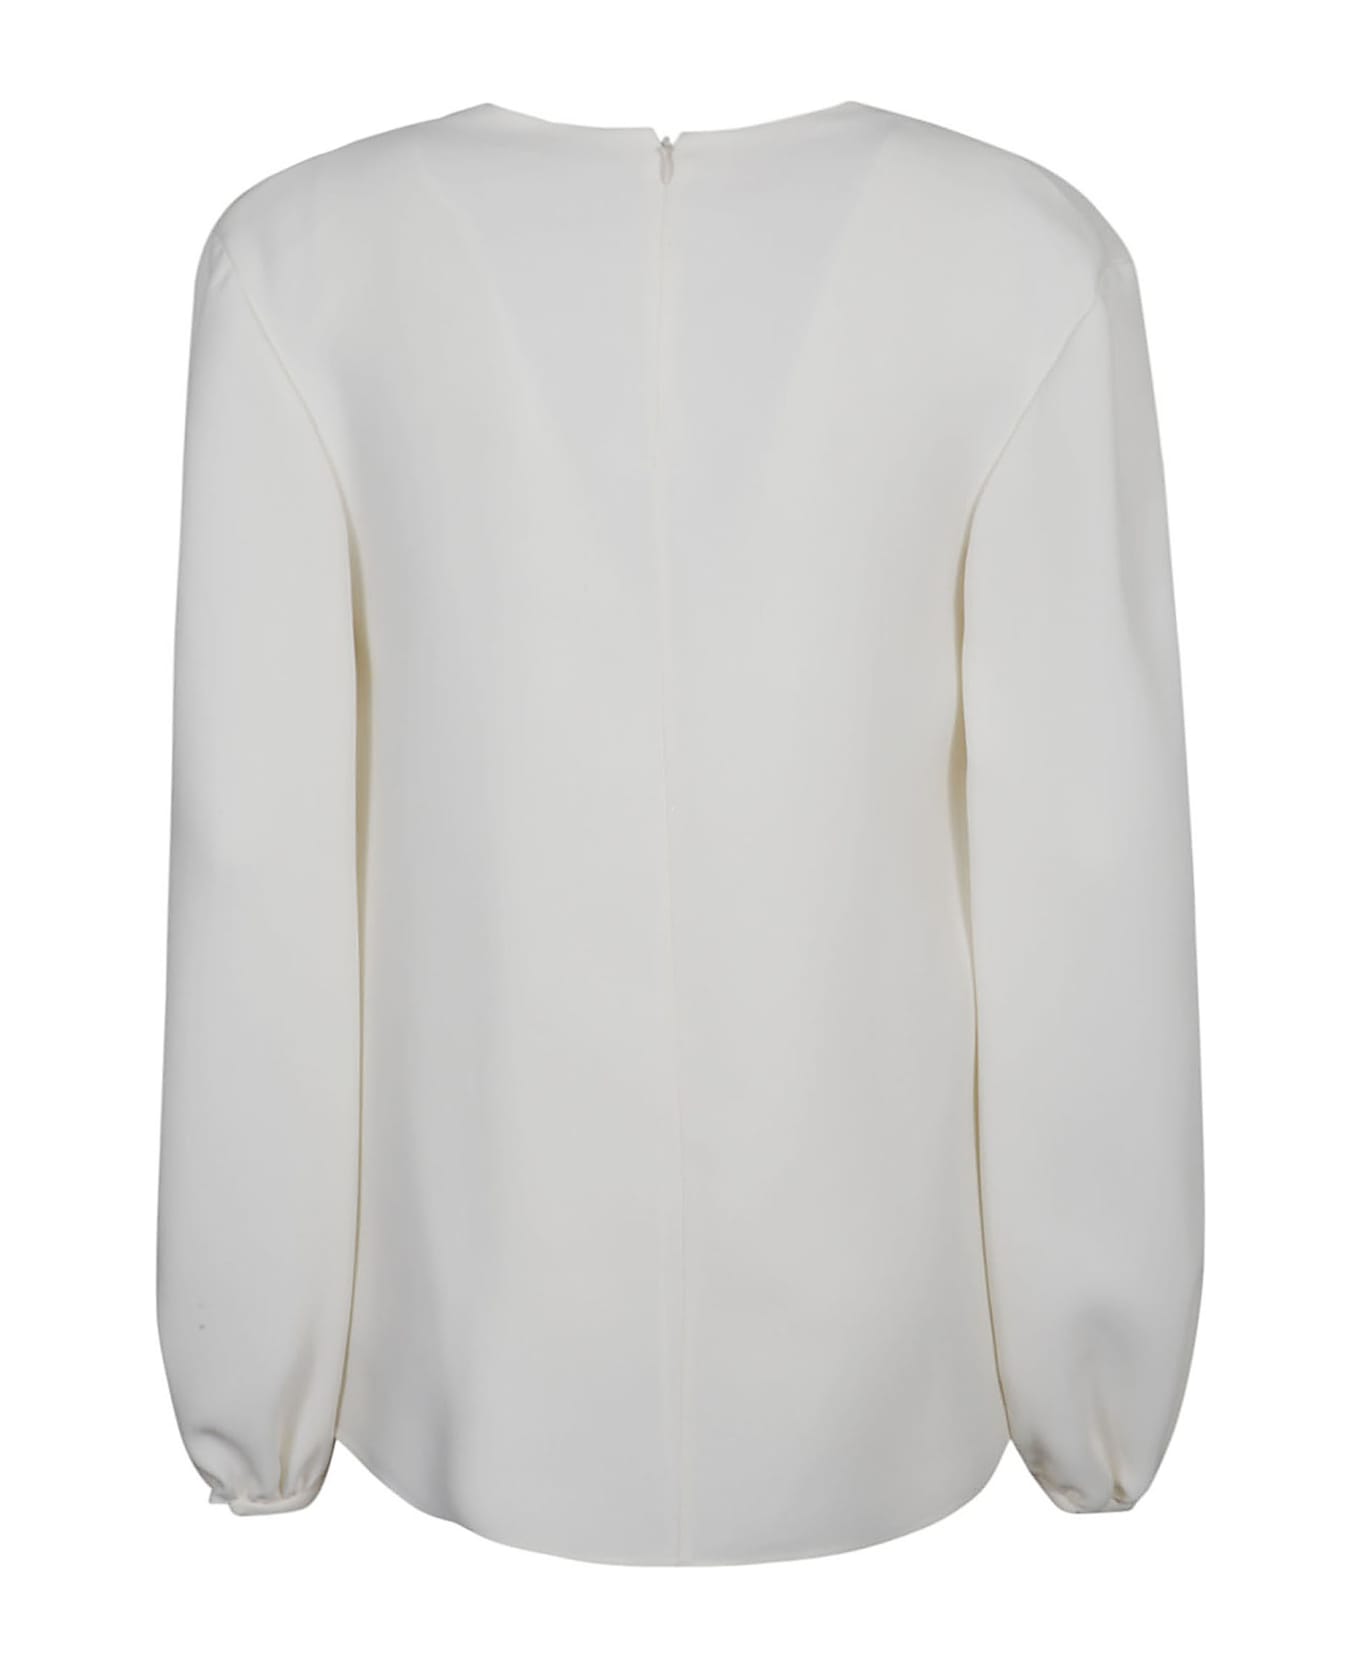 Valentino Chain Detail Blouse - Ivory